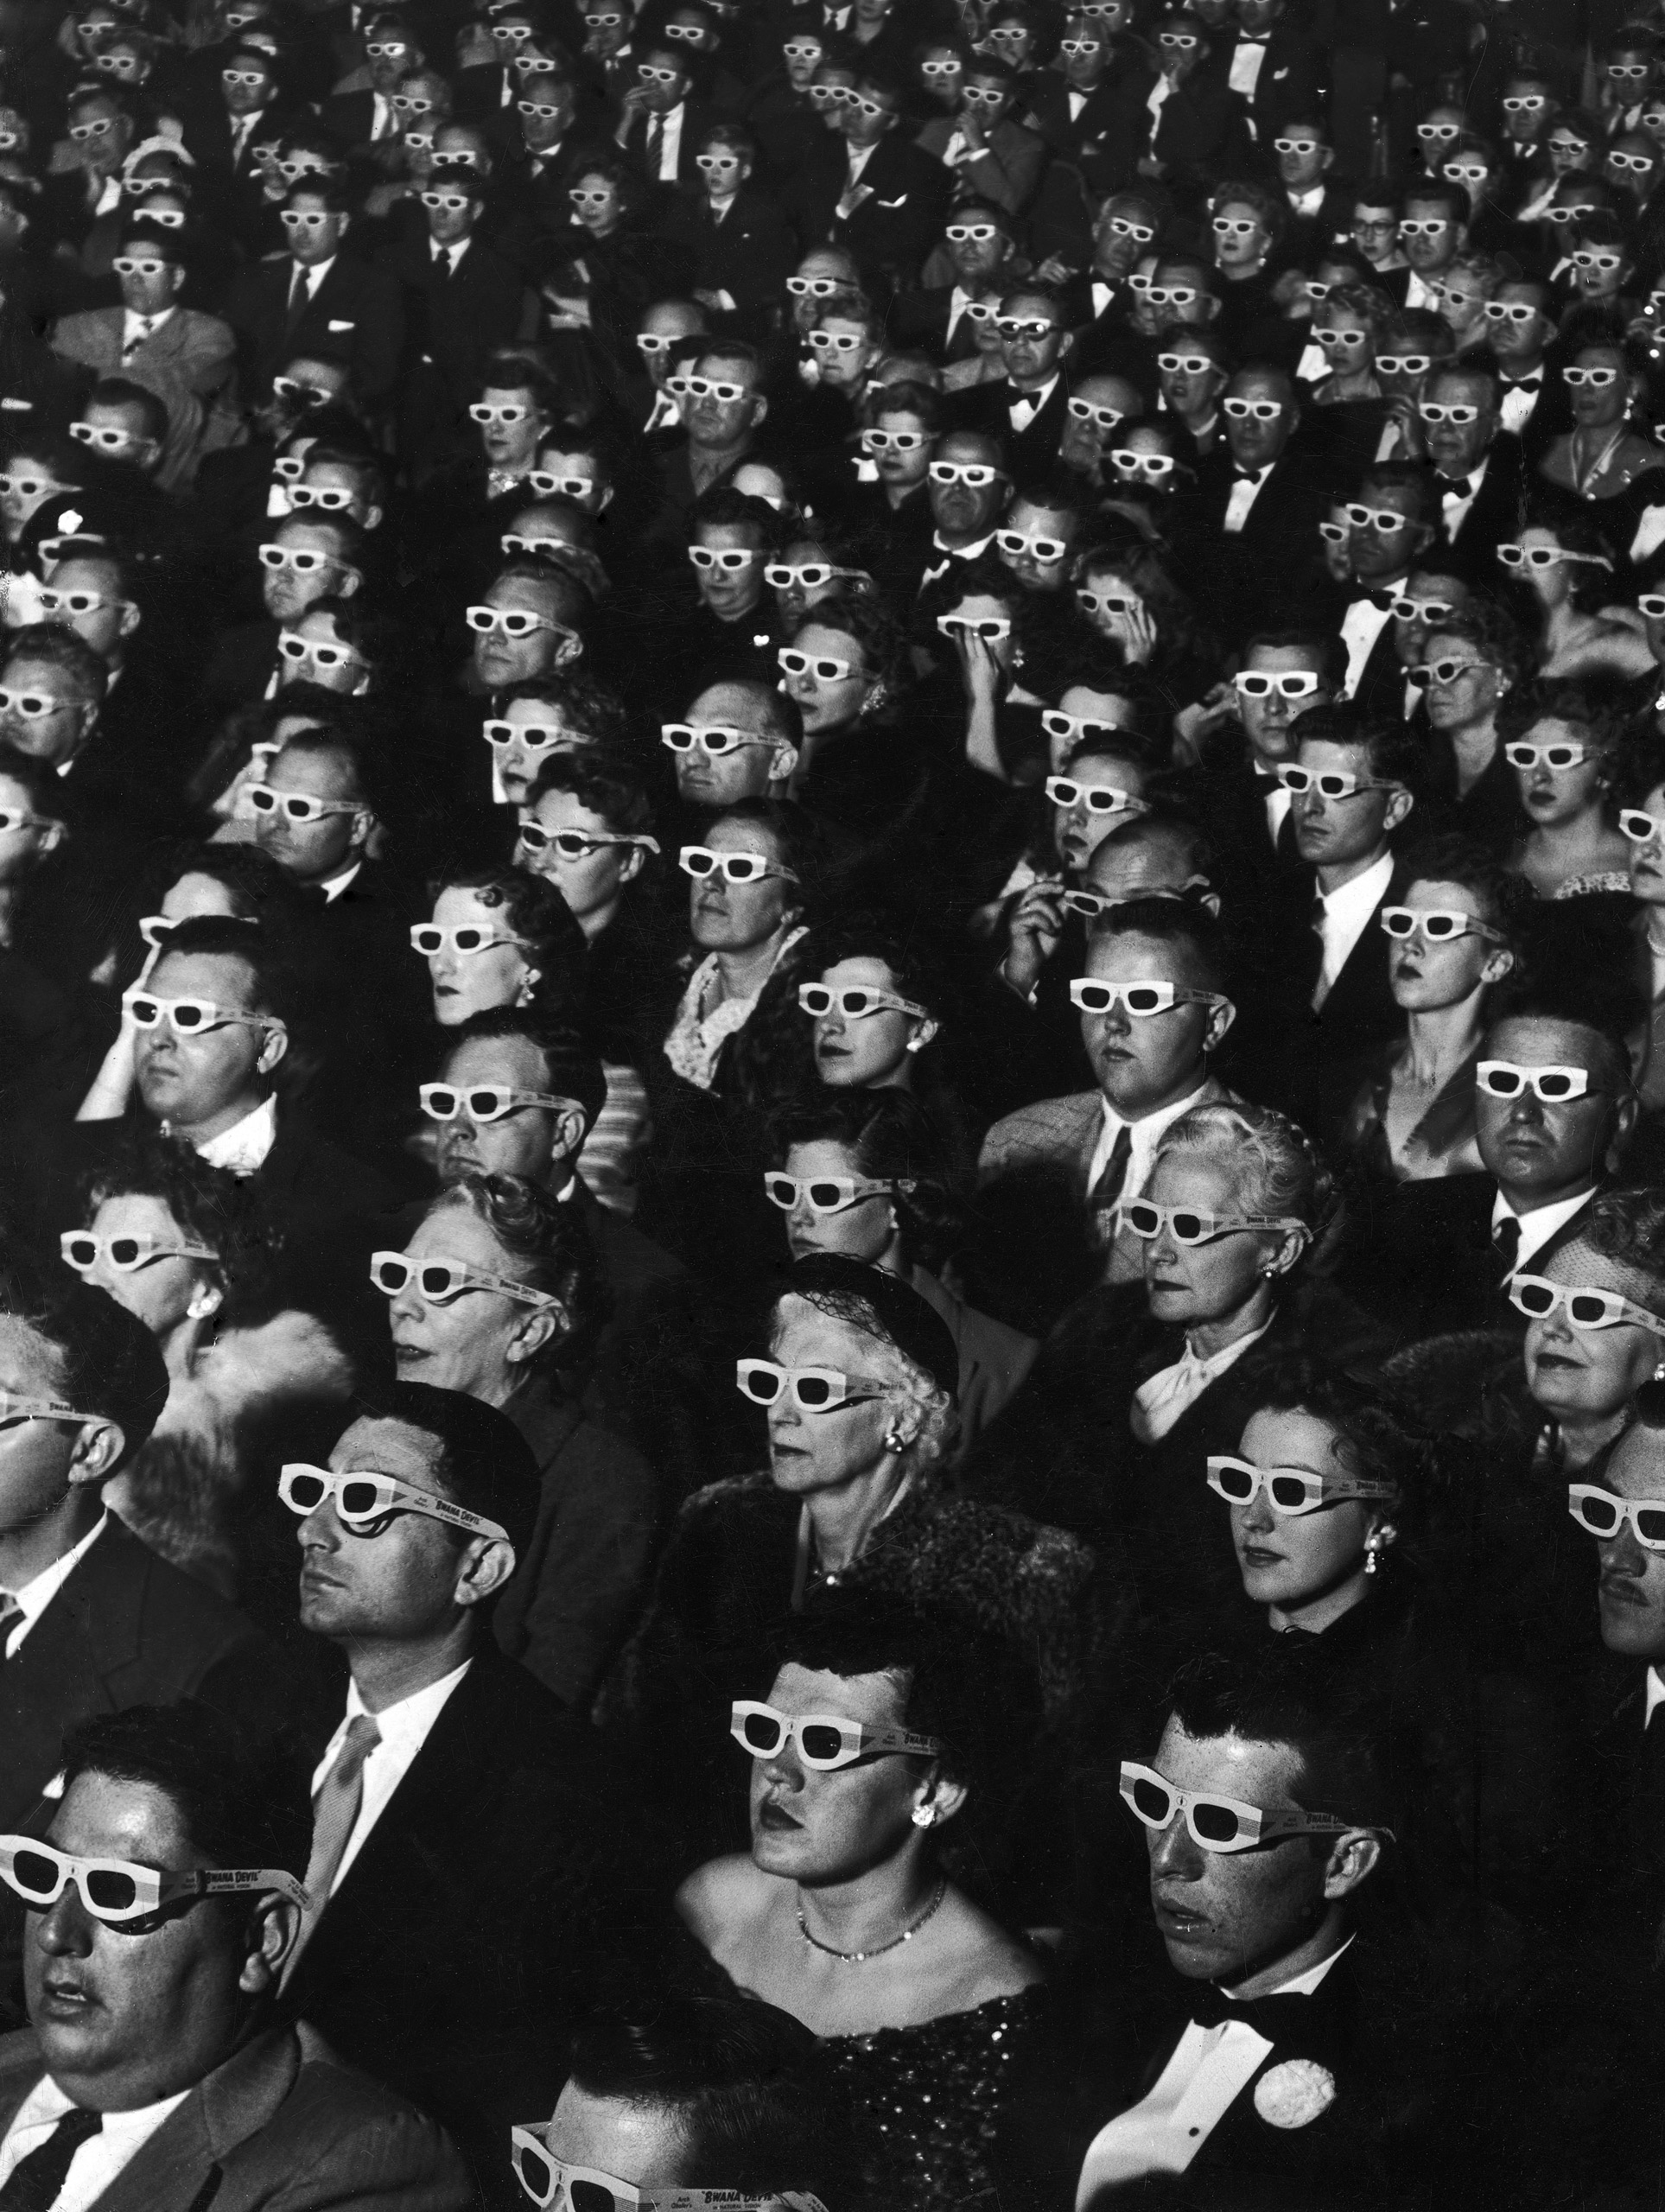 Watching Bwana Devil in 3-D at the Paramount Theater, 1952